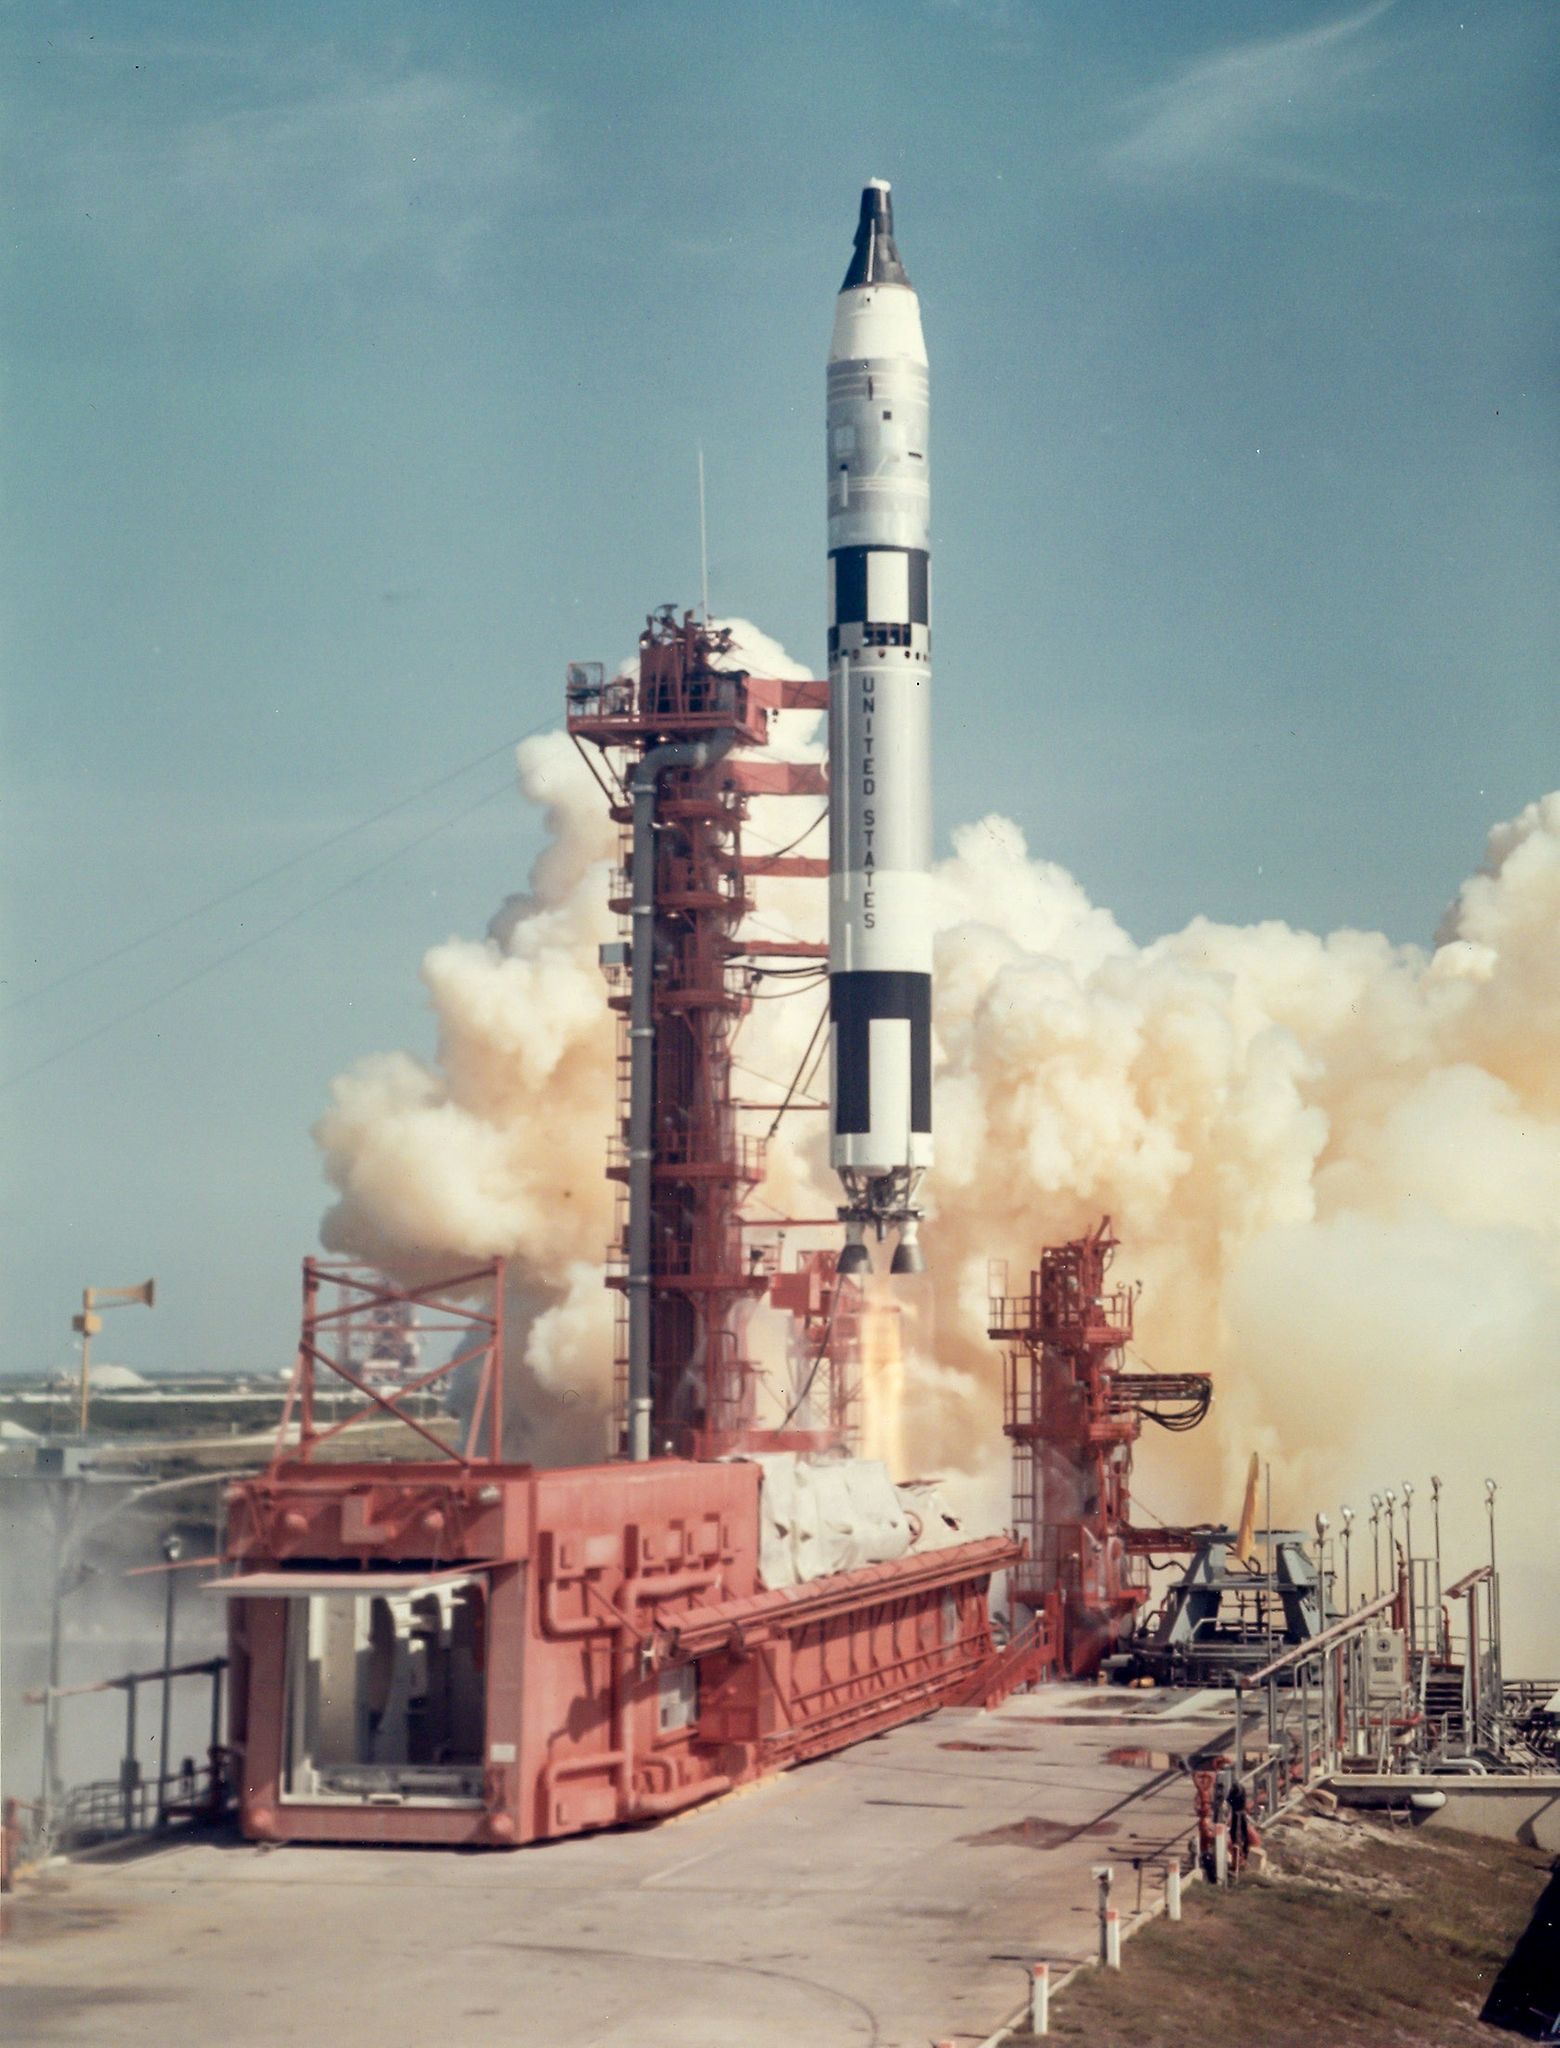 Launch from Pad19 at Cape Kennedy, Gemini 5, 21 August 1965 Vintage chromogenic print on fibre-based